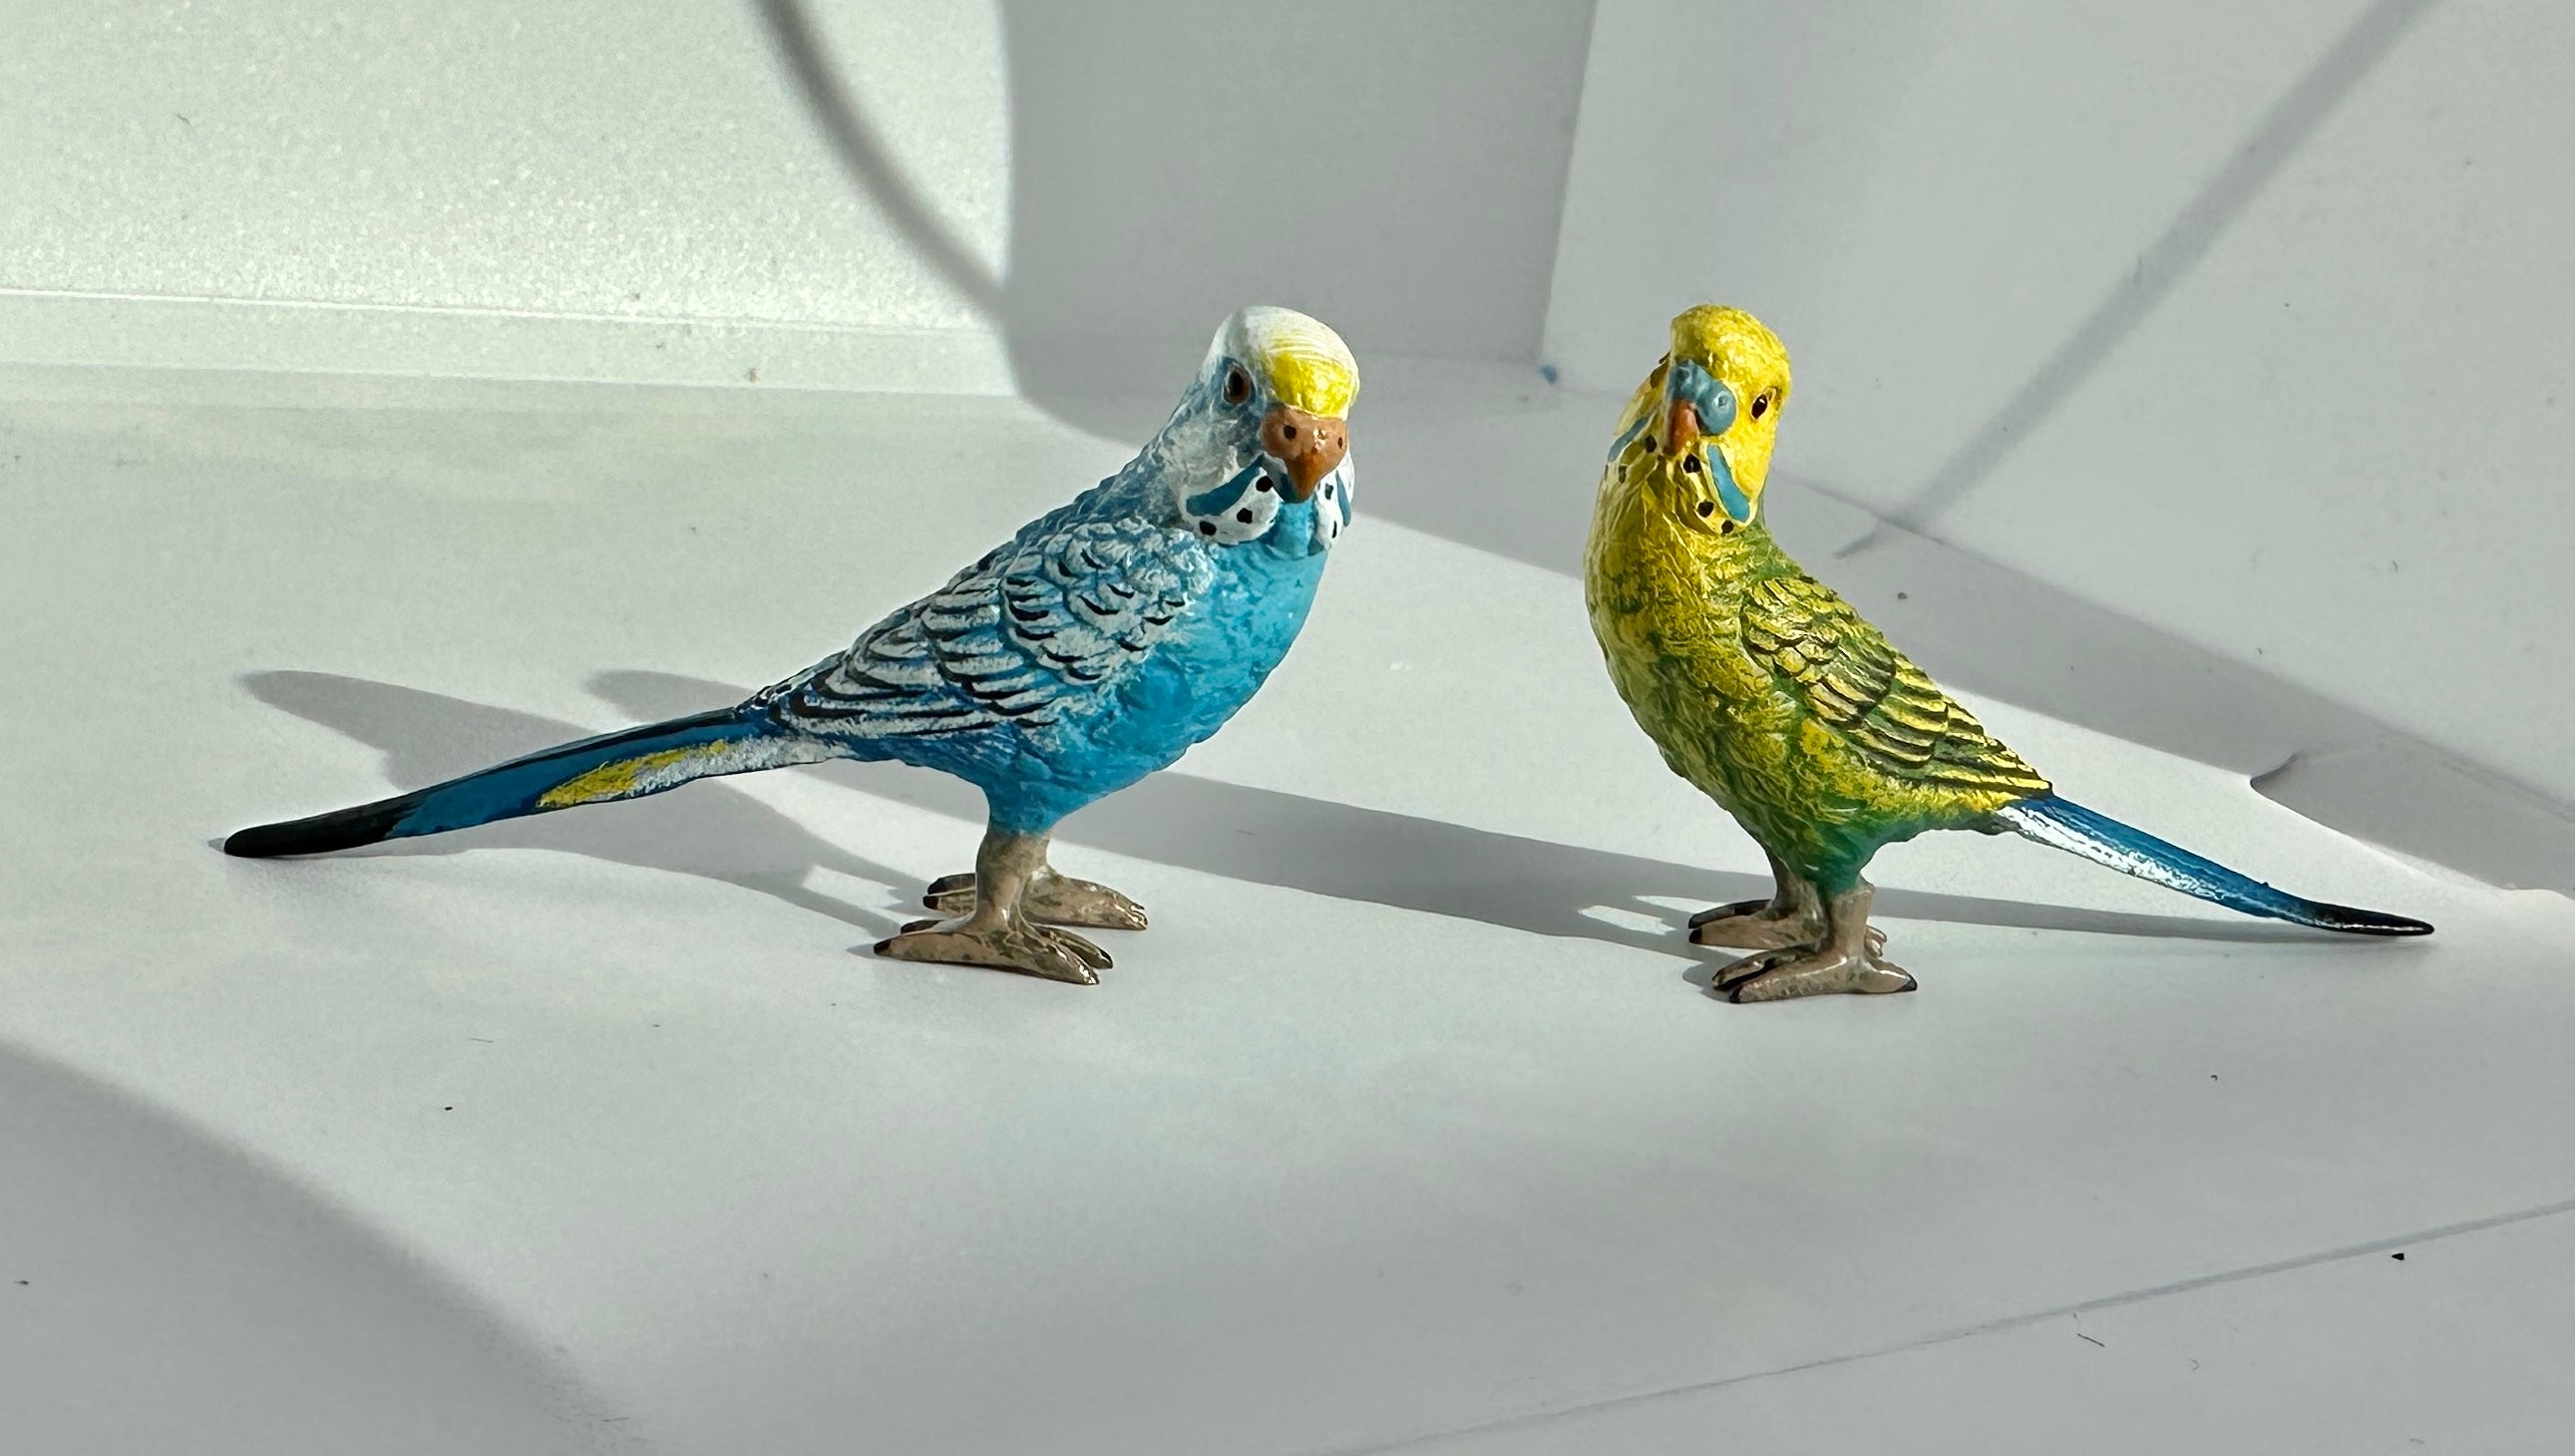 THIS IS A SUPERB PAIR OF BERGMAN AUSTRIAN VIENNA BRONZE PARAKEET BIRDS IN BLUE AND YELLOW GREEN PLUMAGE.
This wonderful pair of antique Austrian Vienna Bronzes (Bronze de Vienne, Wiener Bronze, Cold Painted Bronze) is so charming with its